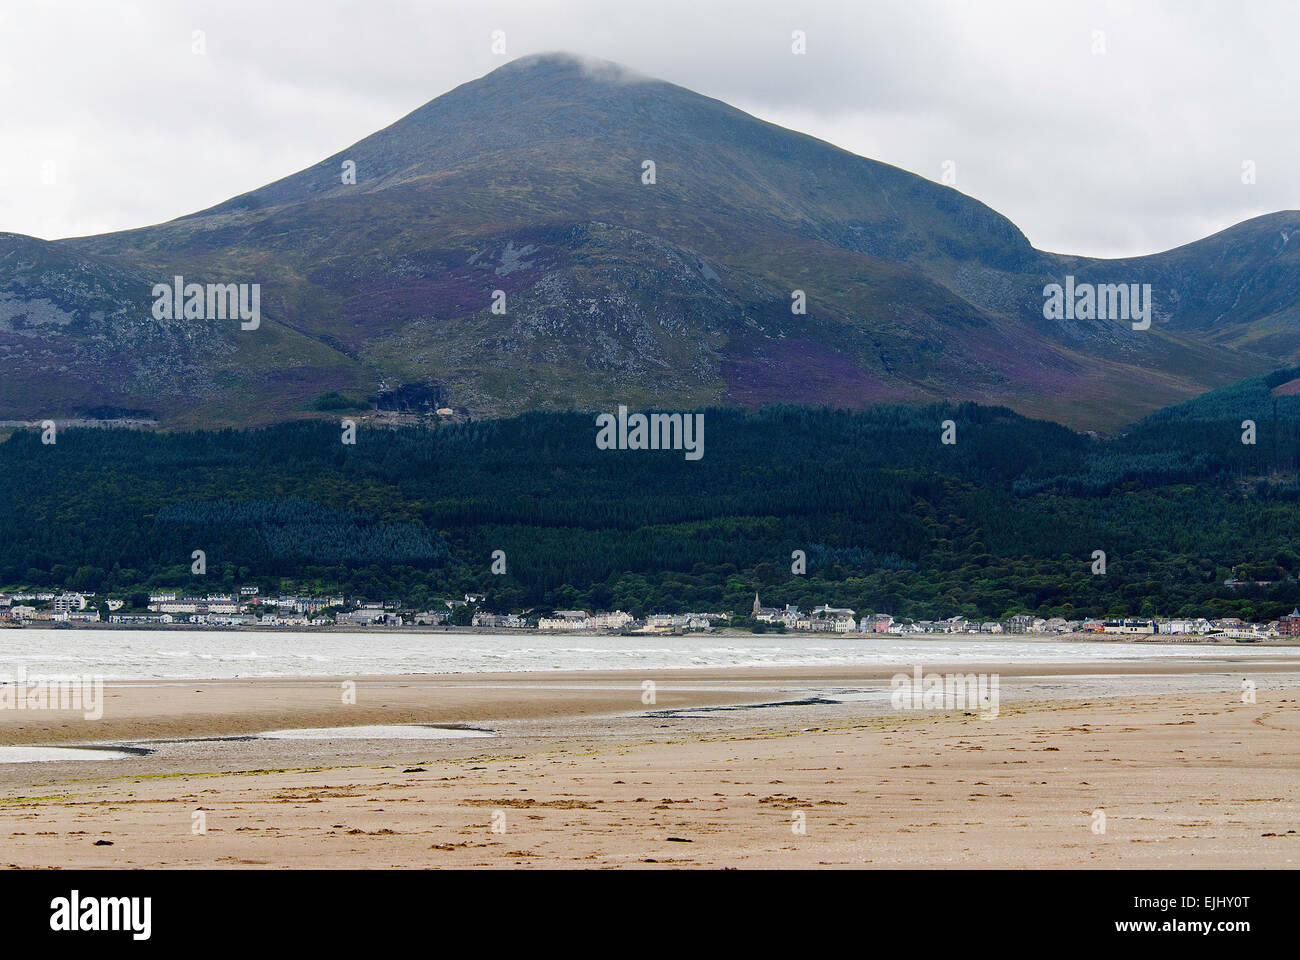 Newcastle, Northern Ireland and Slieve Donard Mountain from the beach at Murlough Nature Reserve, Country Down, Northern Ireland Stock Photo